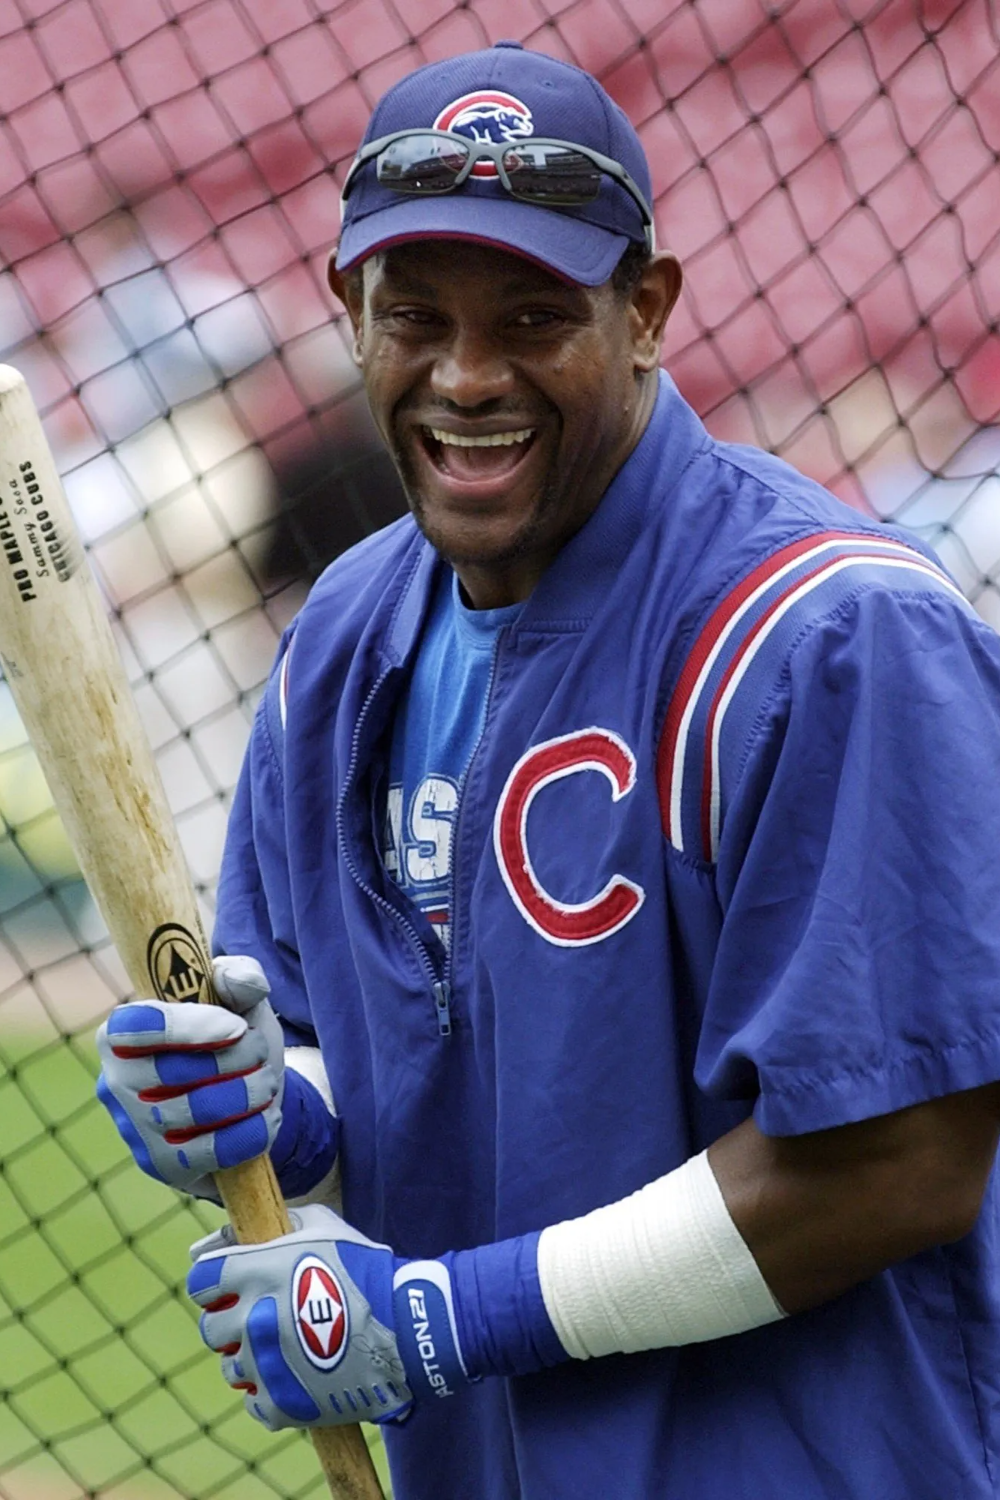 Sammy Was Captured Smiling While Capturing Picture With The Chicago Cub